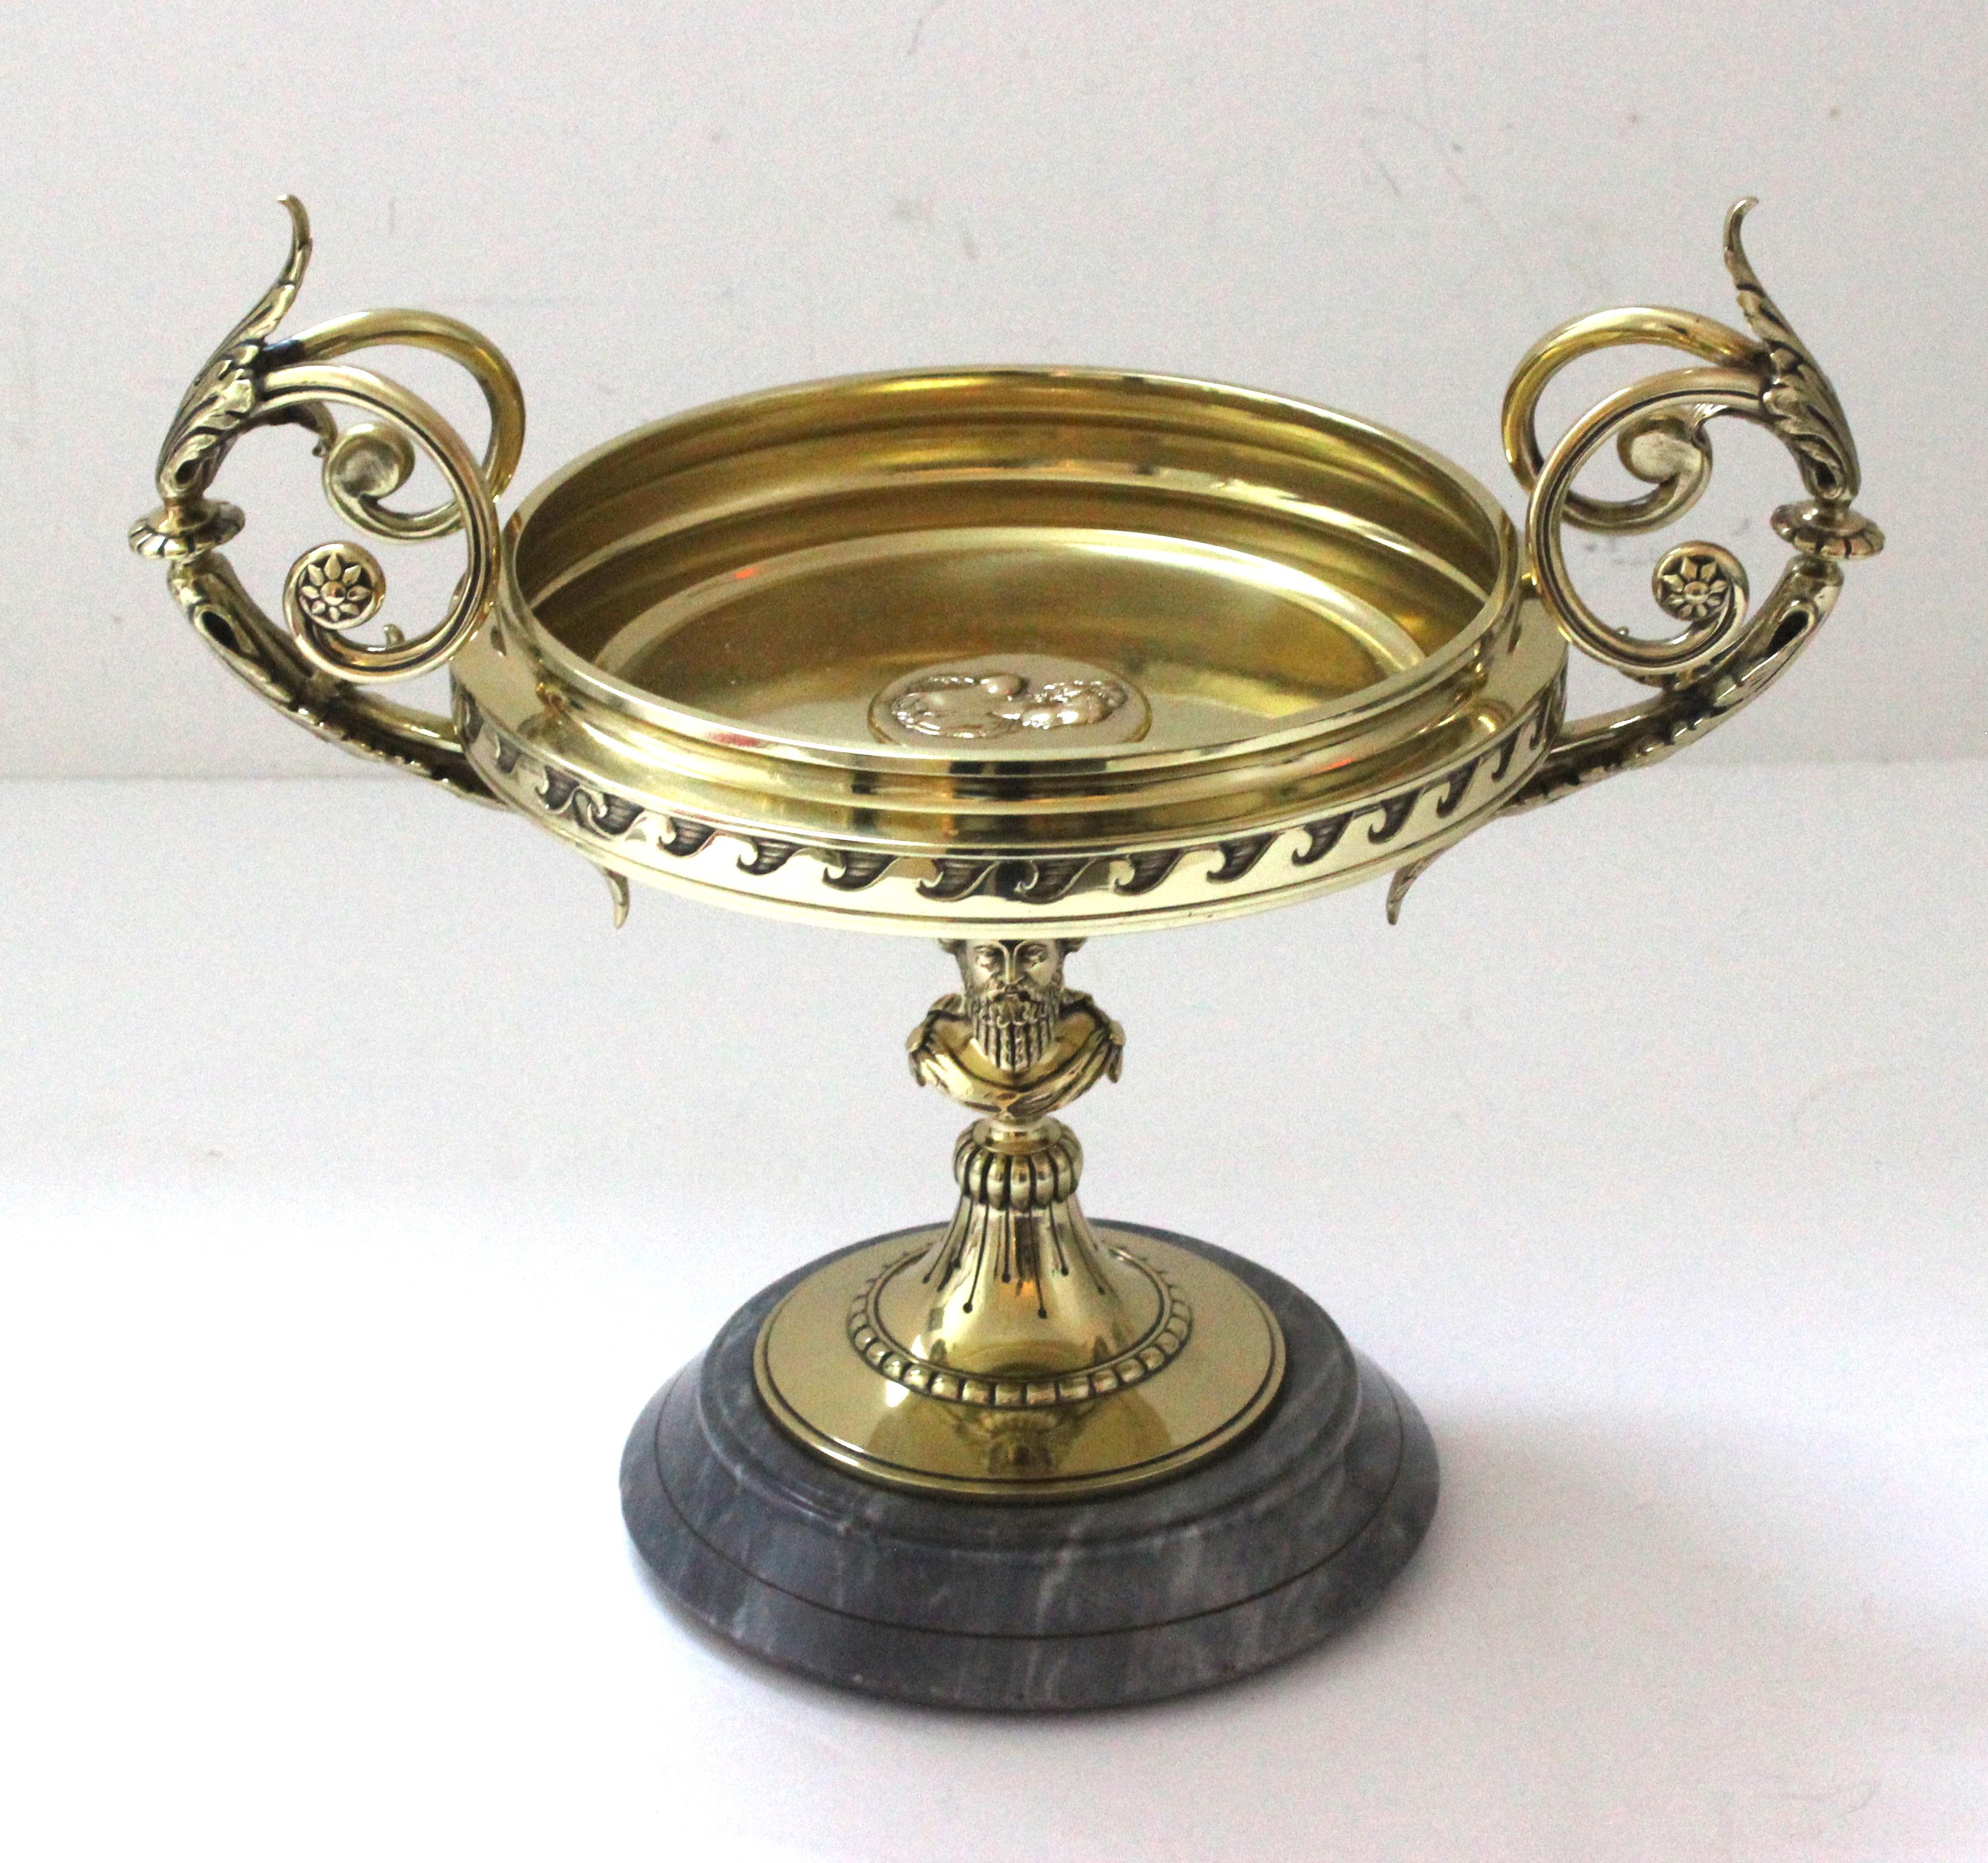 This stylish, classic and chic Italian tazza dates to the latter of the 19th century.

Note: The piece has been professionally polished and finished with a clear lacquer (thus no tarnishing).